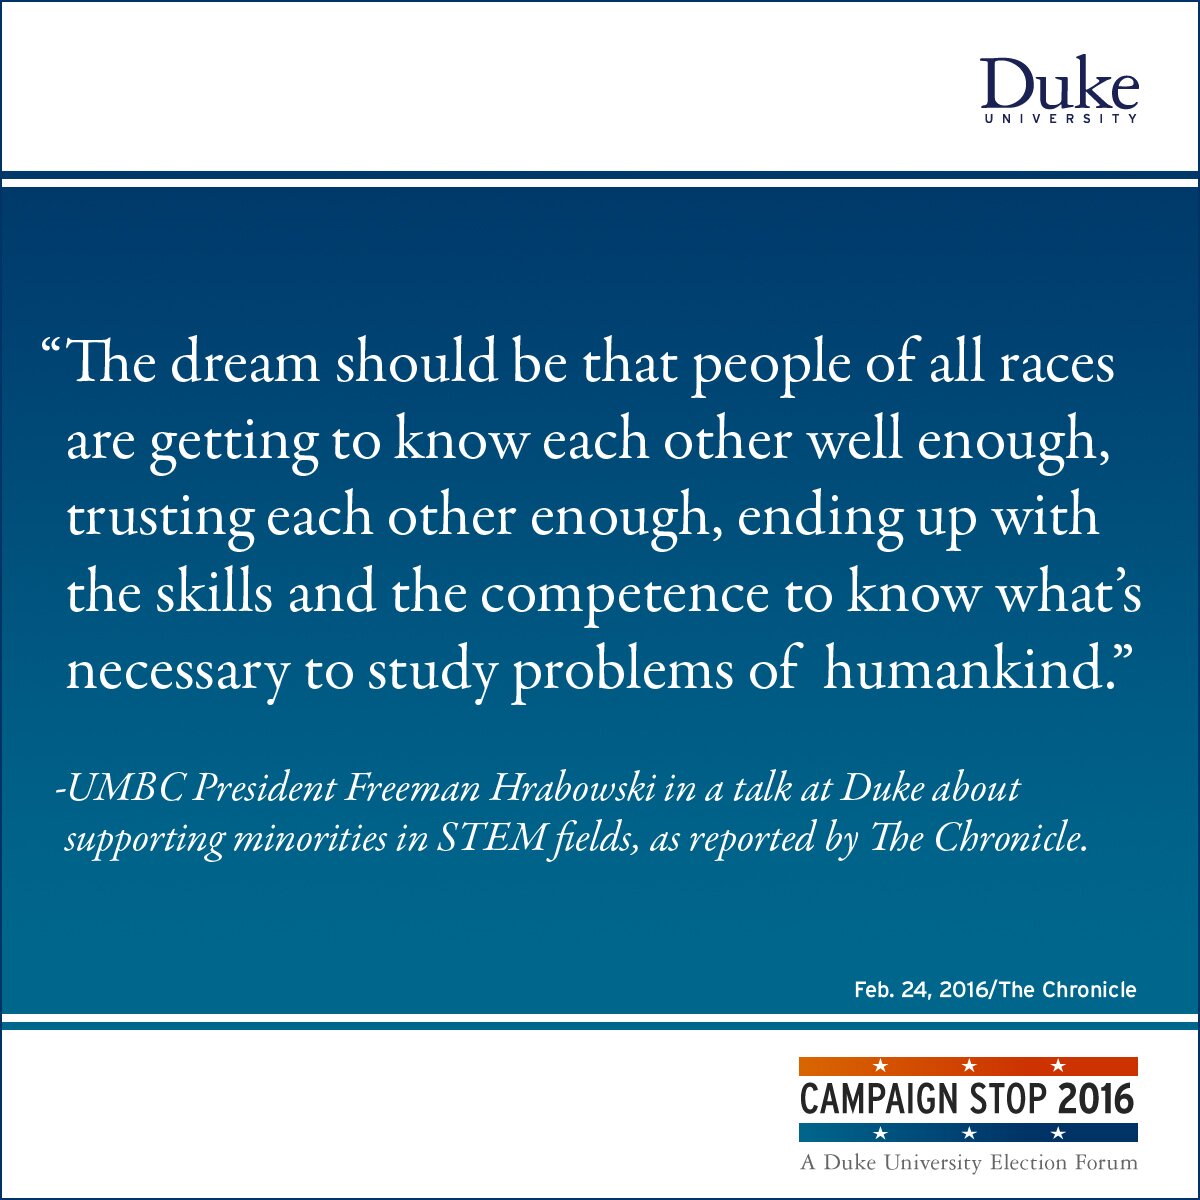 “The dream should be that people of all races are getting to know each other well enough, trusting each other enough, ending up with the skills and the competence to know what’s necessary to study problems of humankind.” -UMBC President Freeman Hrabowski in a talk at Duke about supporting minorities in STEM fields, as reported by The Chronicle.